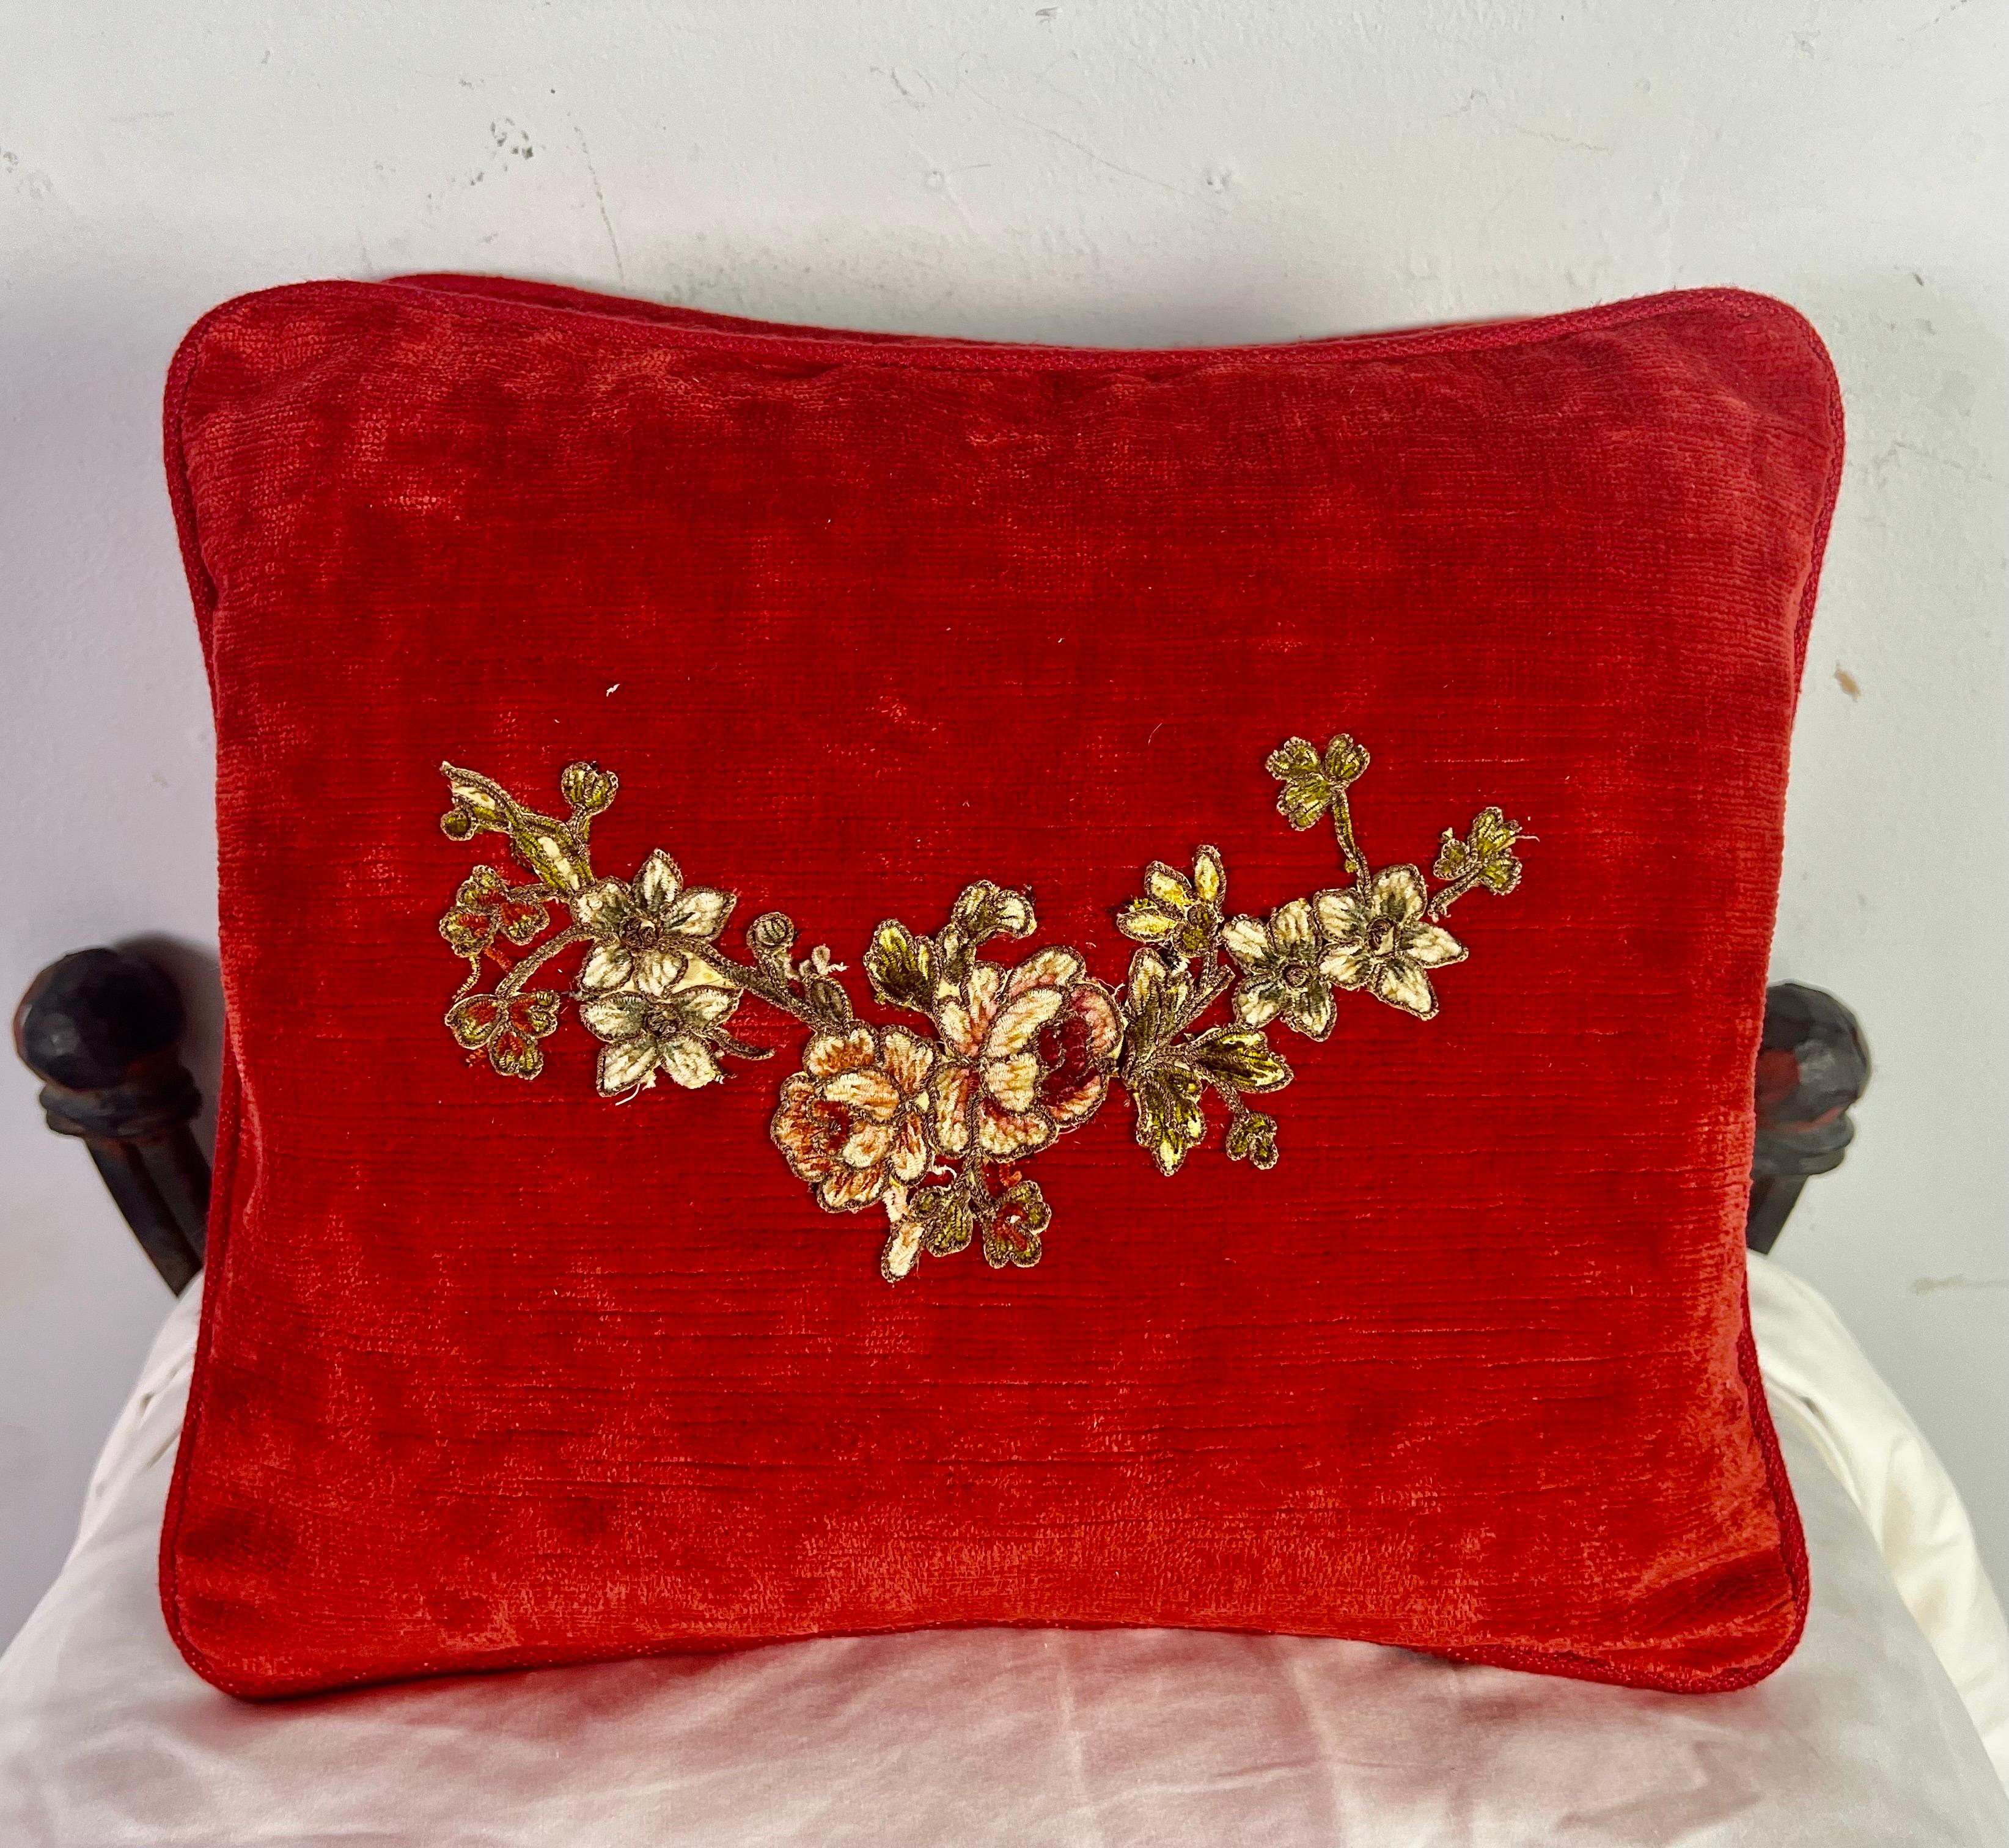 Custom pillows made with 19th century handmade metallic & chenille appliques. The appliques were combined with red velvet. Down inserts.